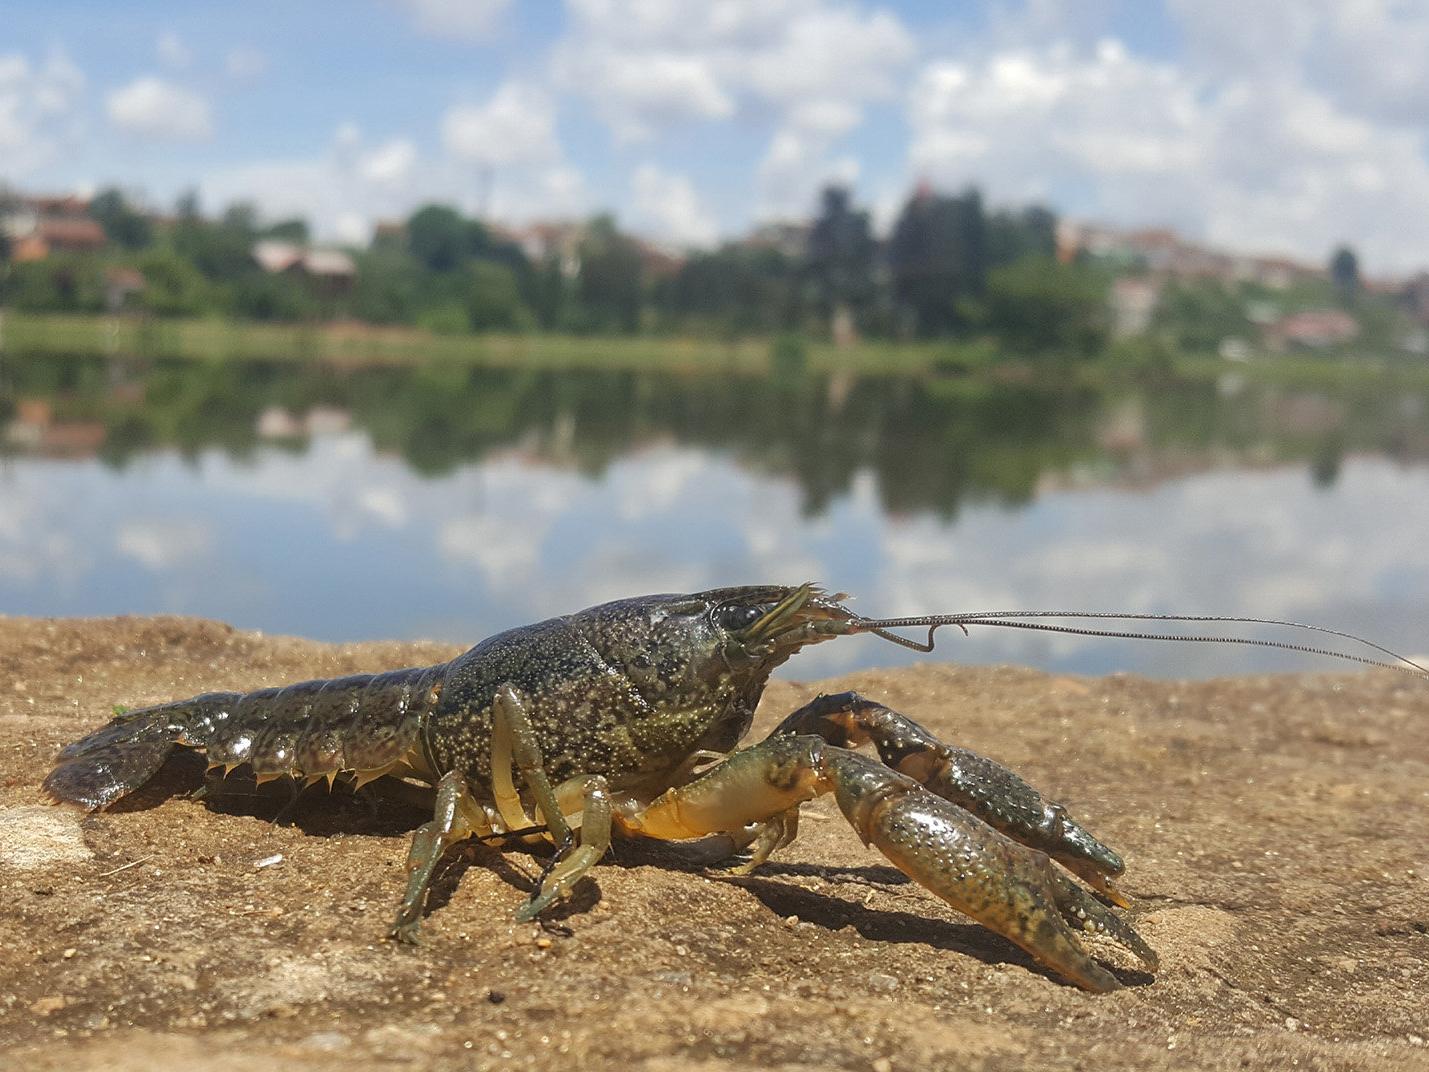 The marbled crayfish only emerged as a new species in the 1990s, but since then it has spread around the world by cloning itself